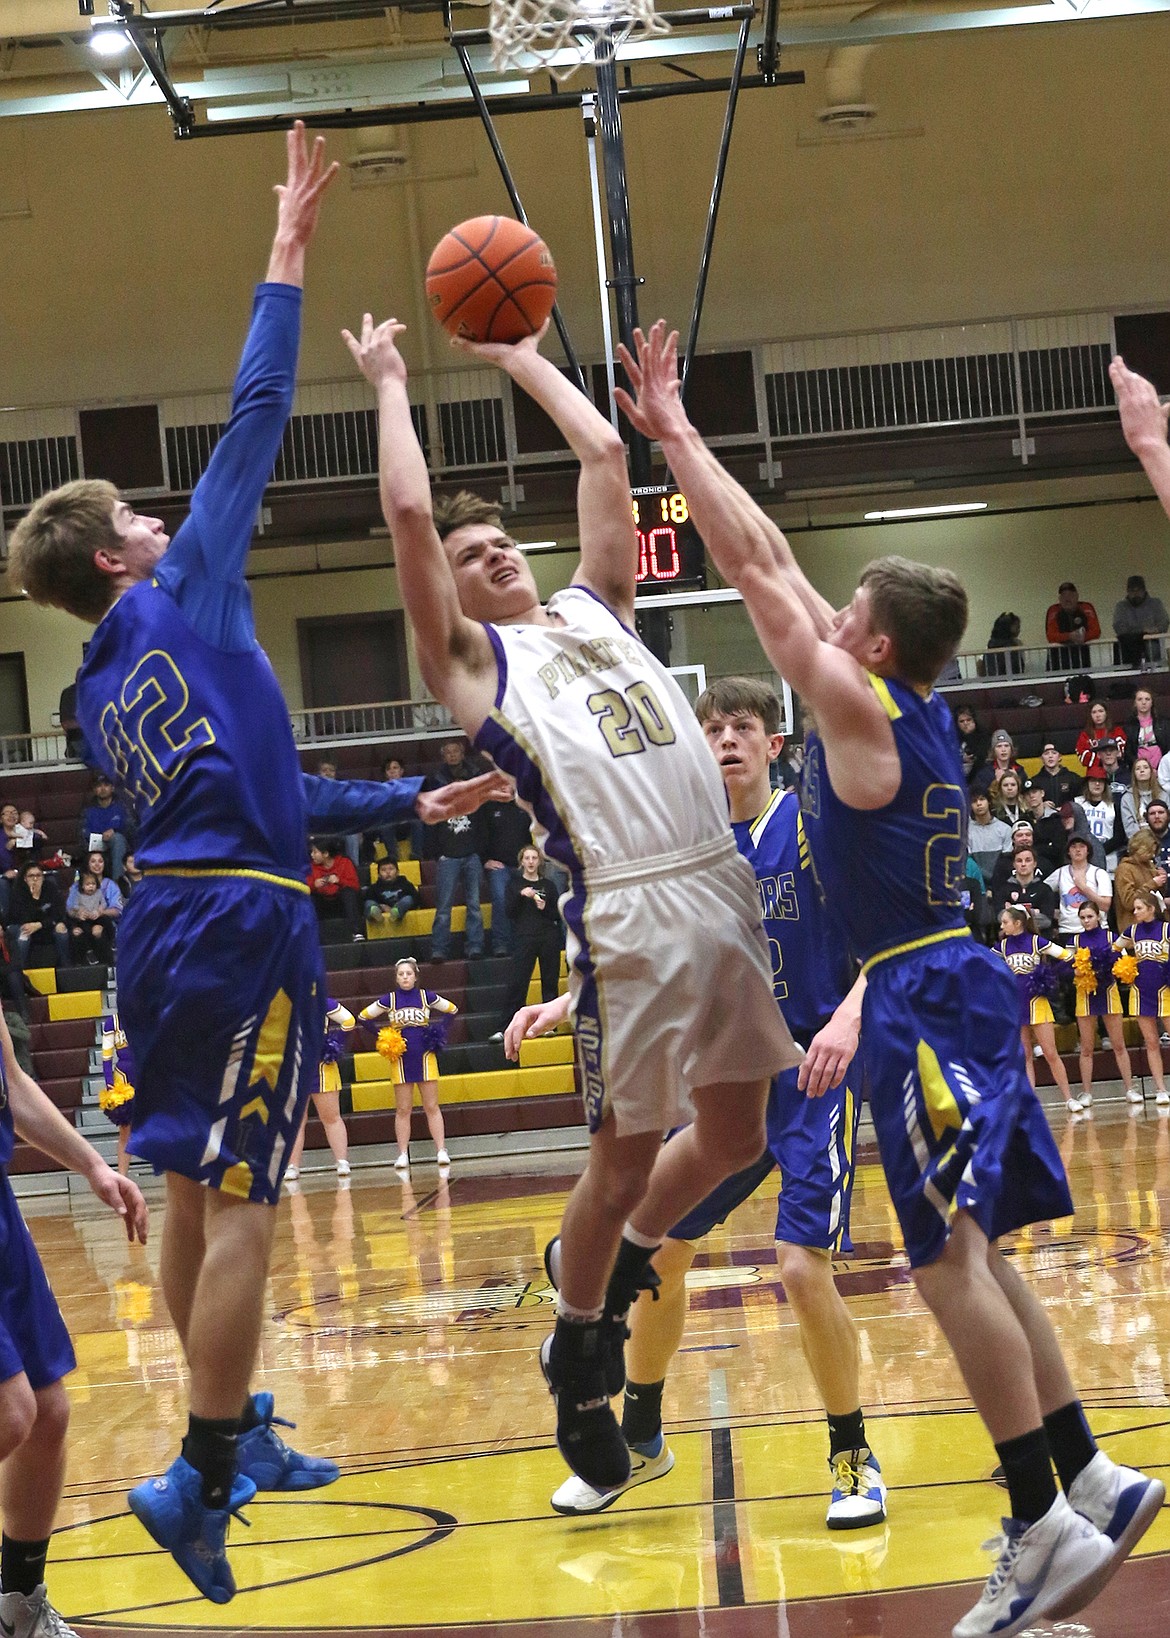 Pirate freshman Jarrett Wilson helped the Pirates overcome a nine point deficit against Libby with less than two minutes remaining in the fourth quarter at the Joe McDonald Center in Pablo Saturday. (Bob Gunderson photo)